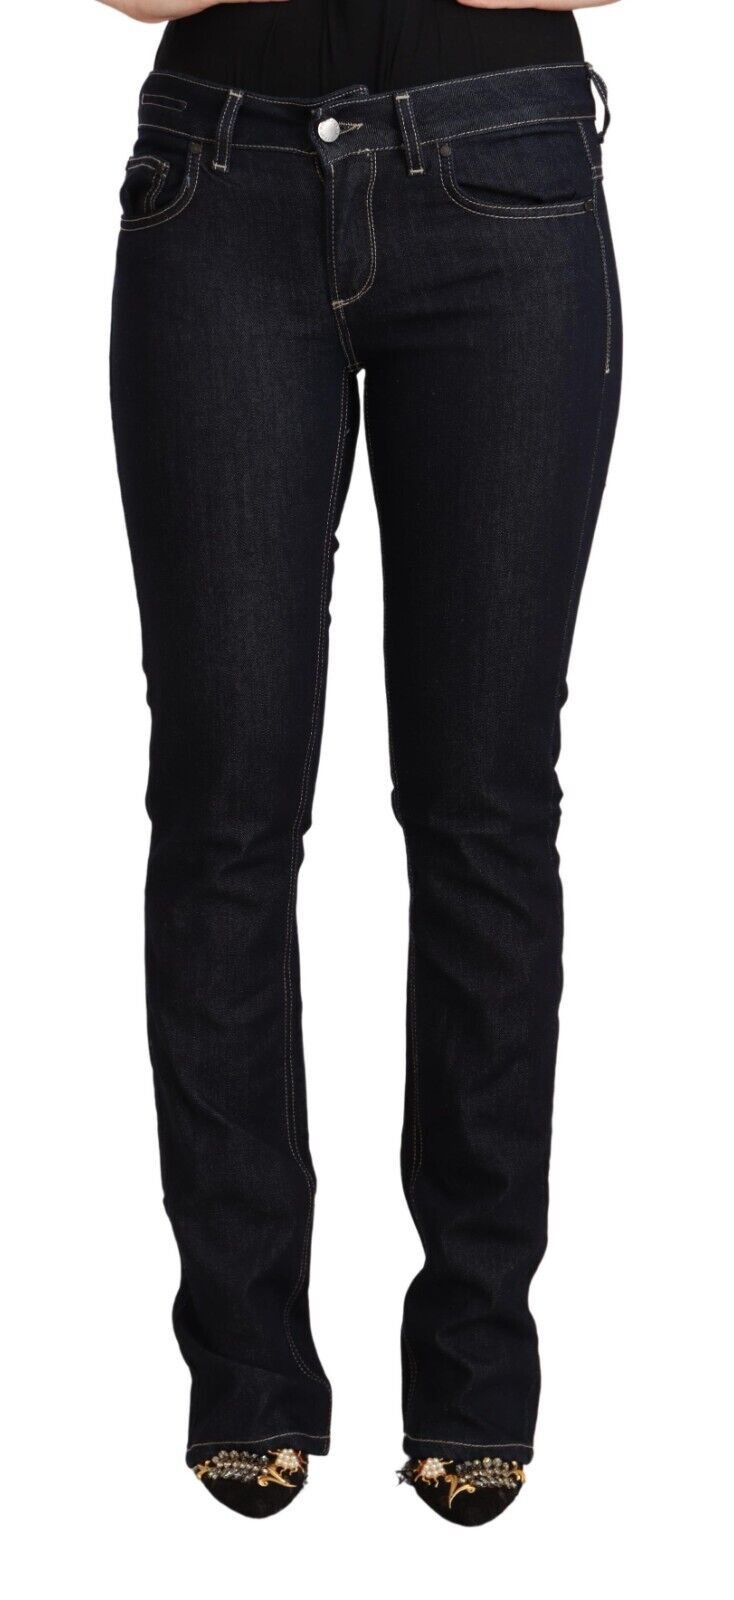 Chic Low Waist Skinny Jeans in Timeless Black